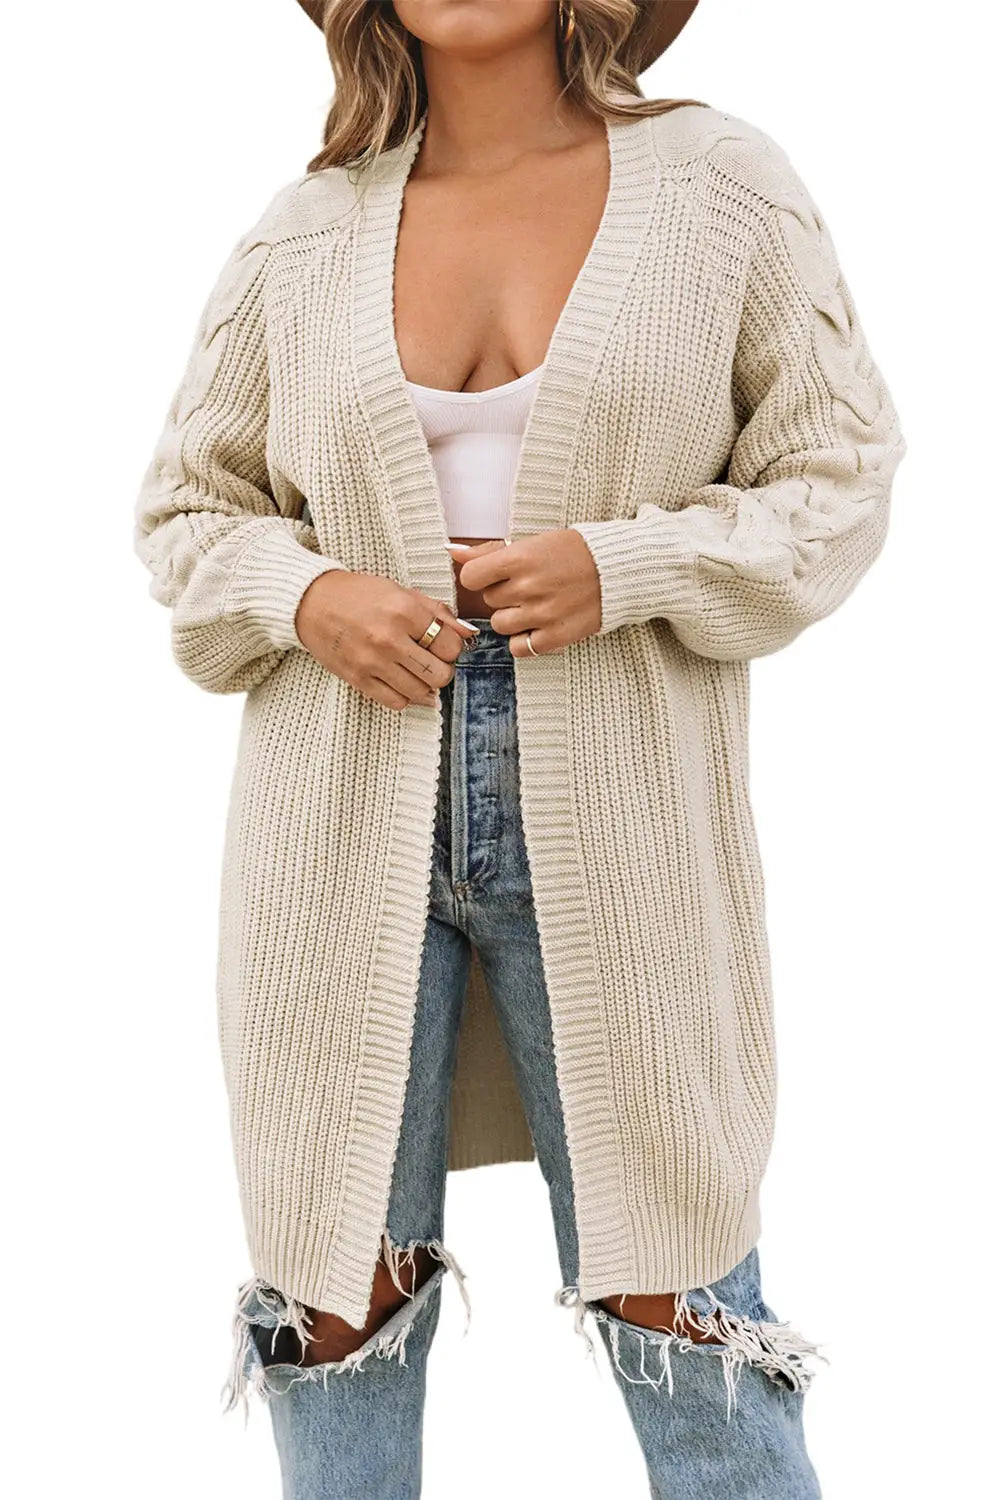 Khaki open front cable sleeve long cardigan - sweaters & cardigans